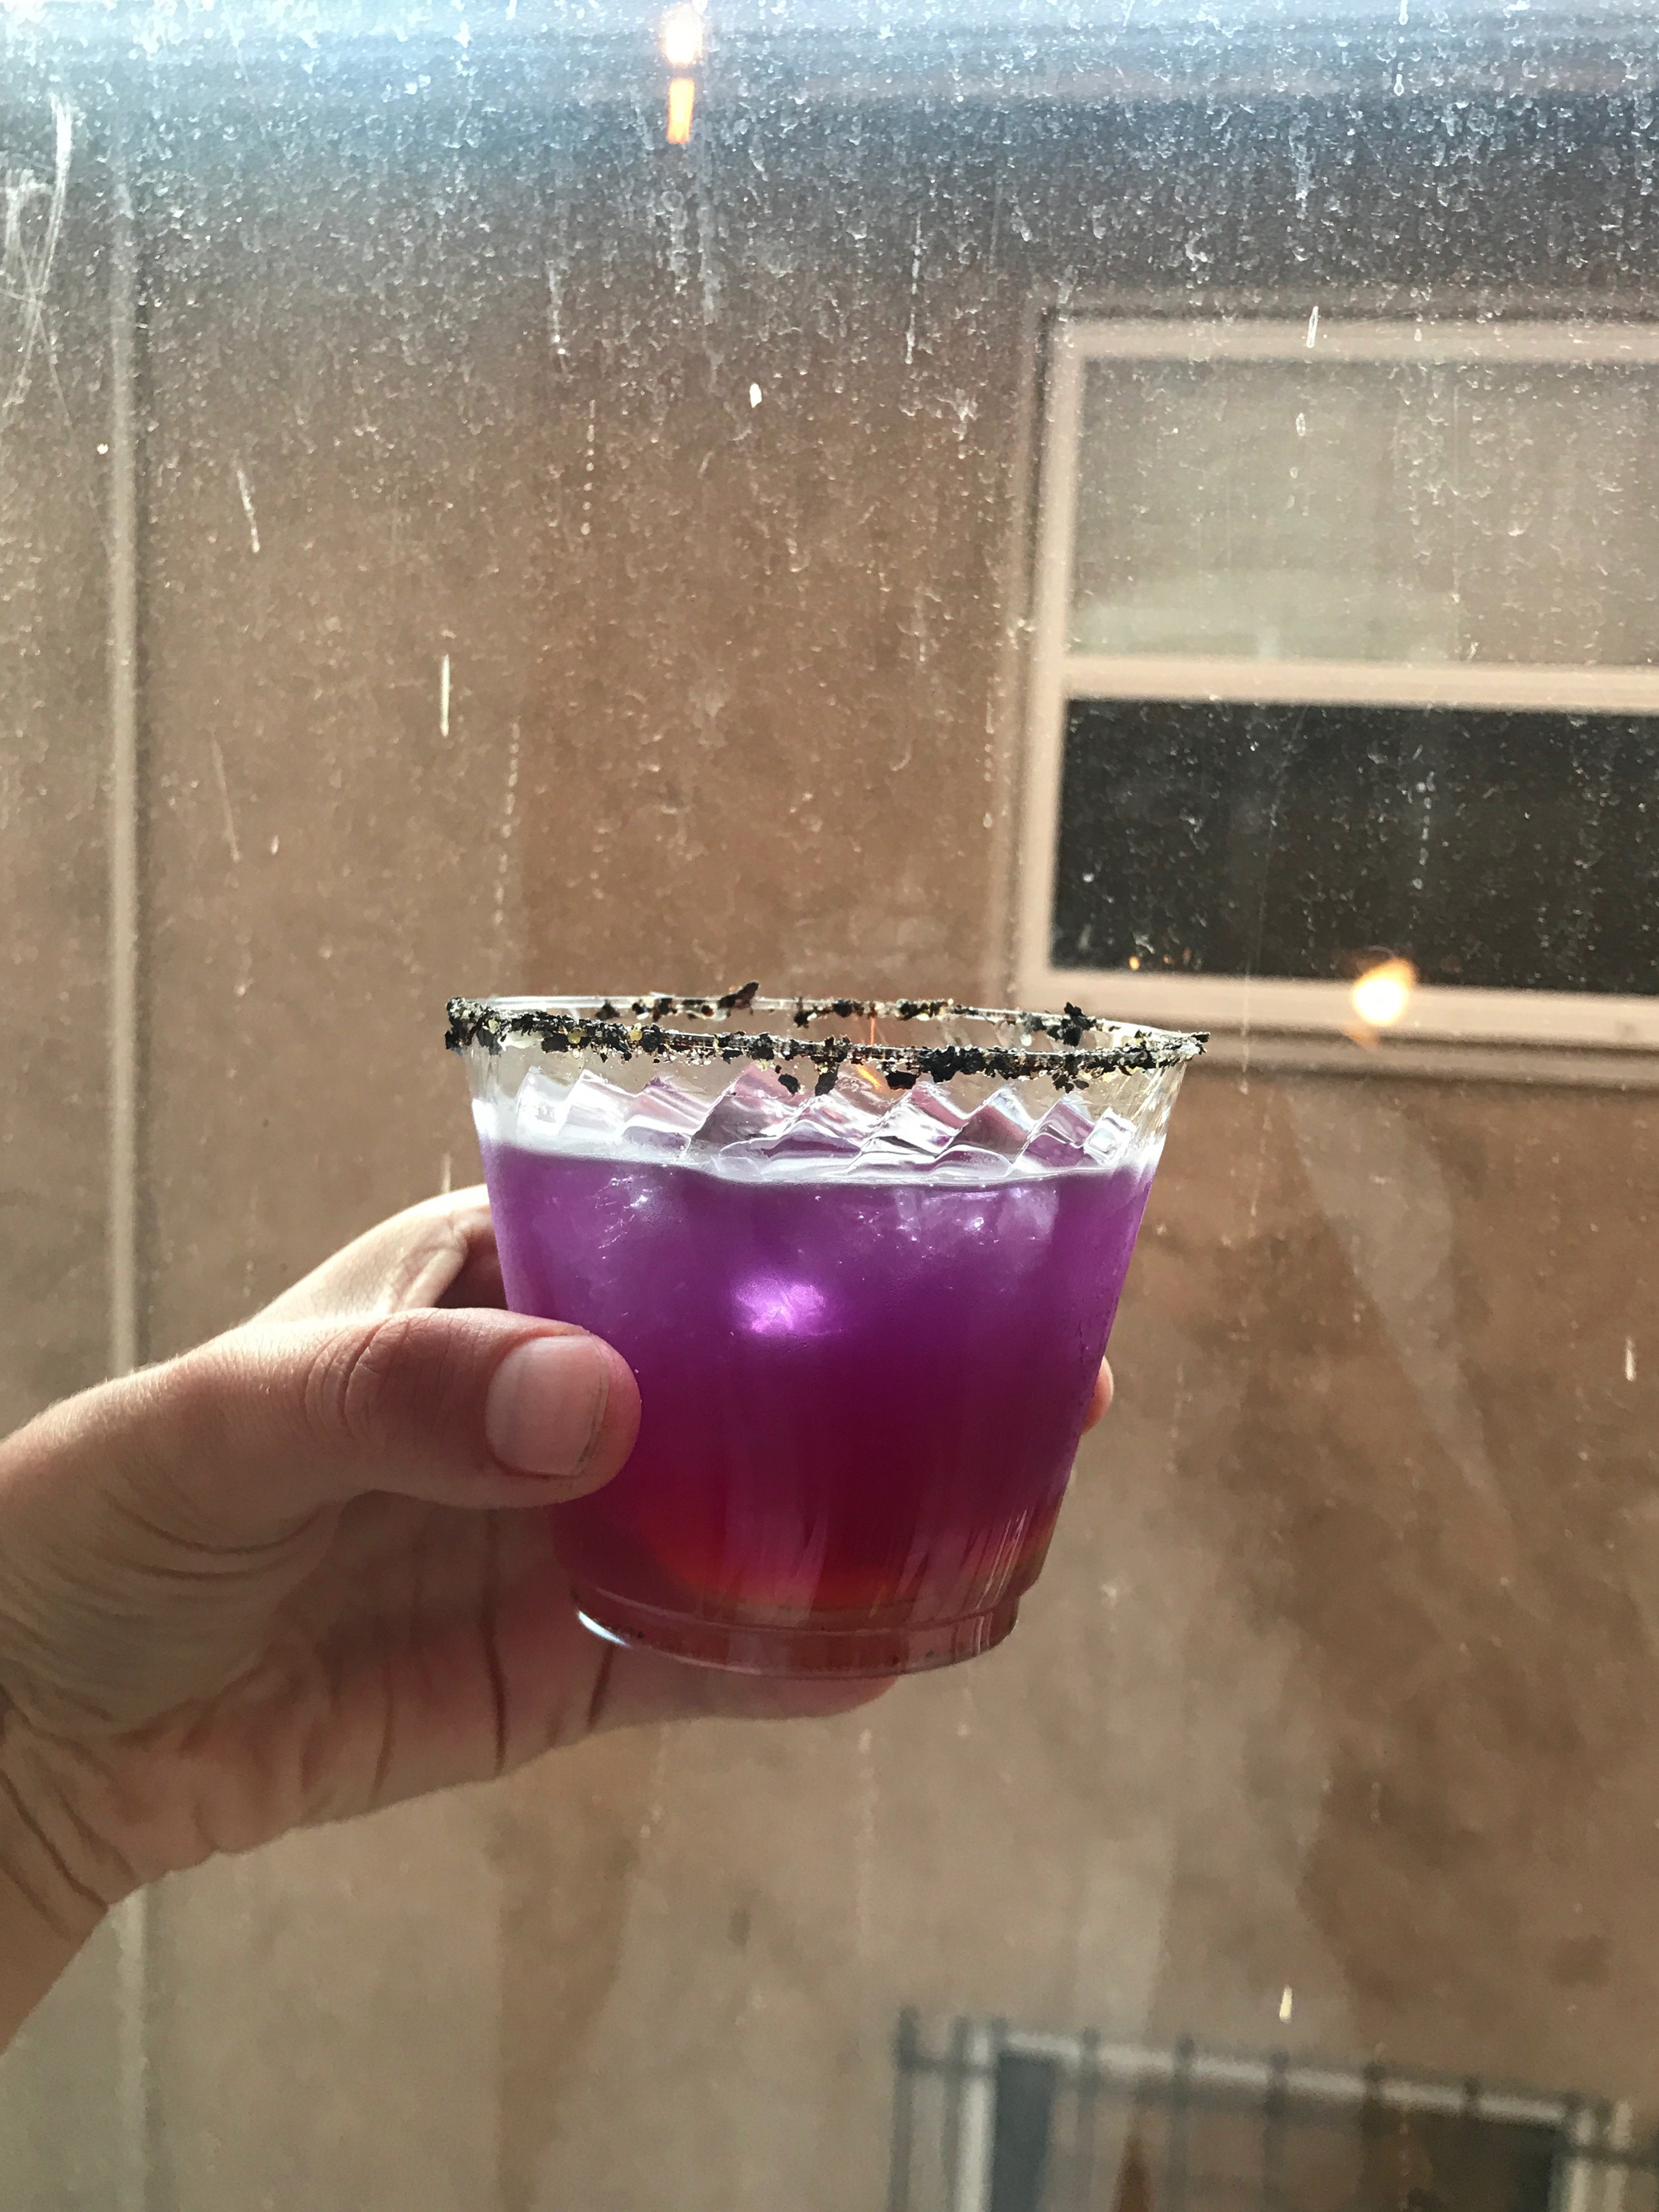 A hand holding a purple drink in a cleap cup in front of a window